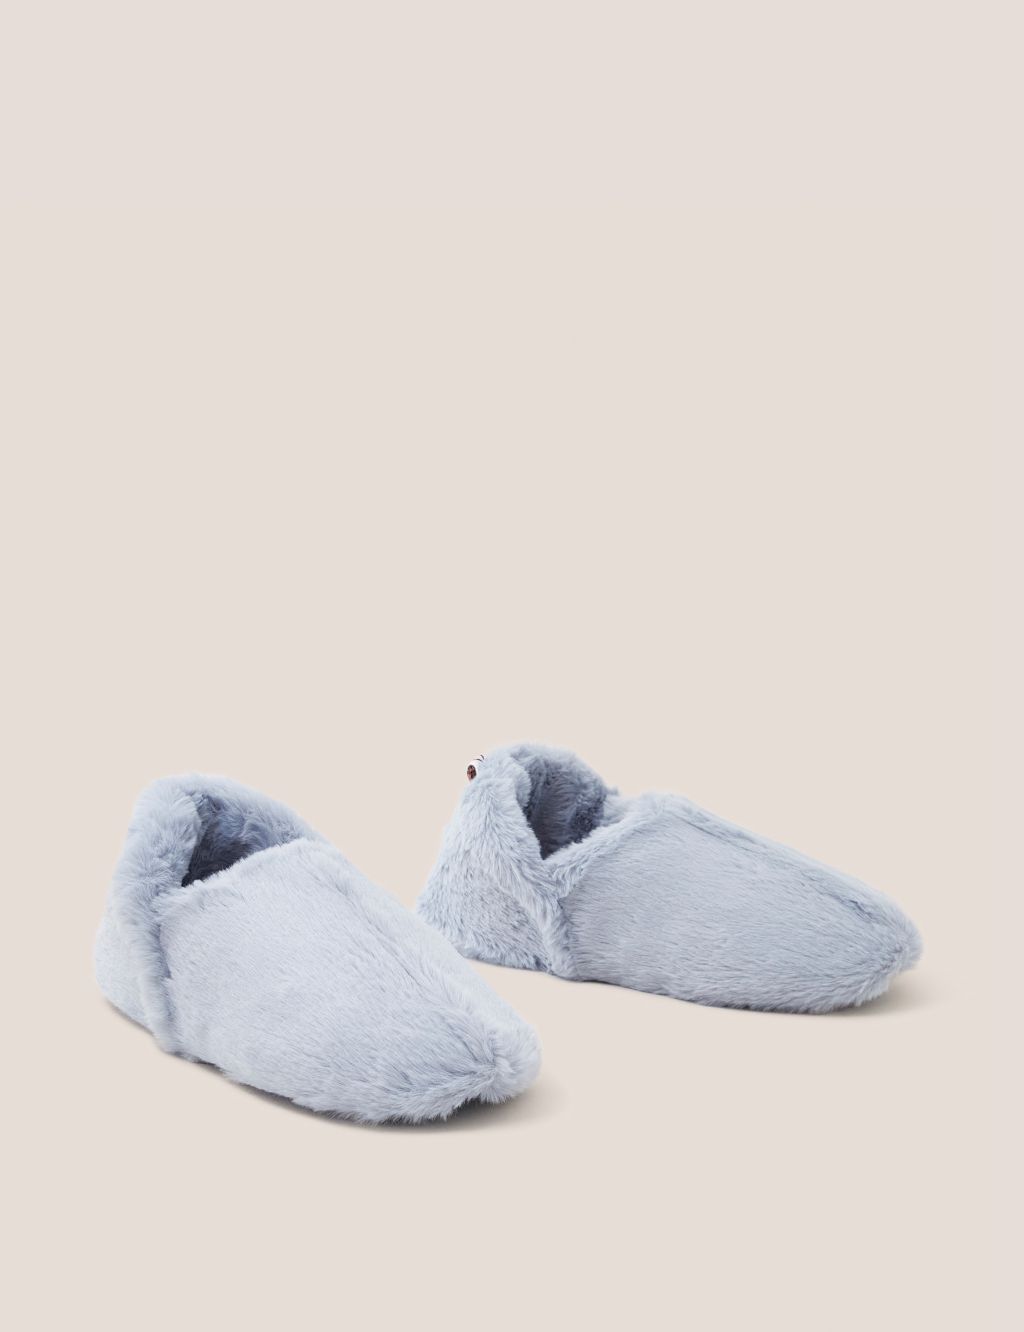 Faux Fur Round Toe Moccasin Slippers image 2